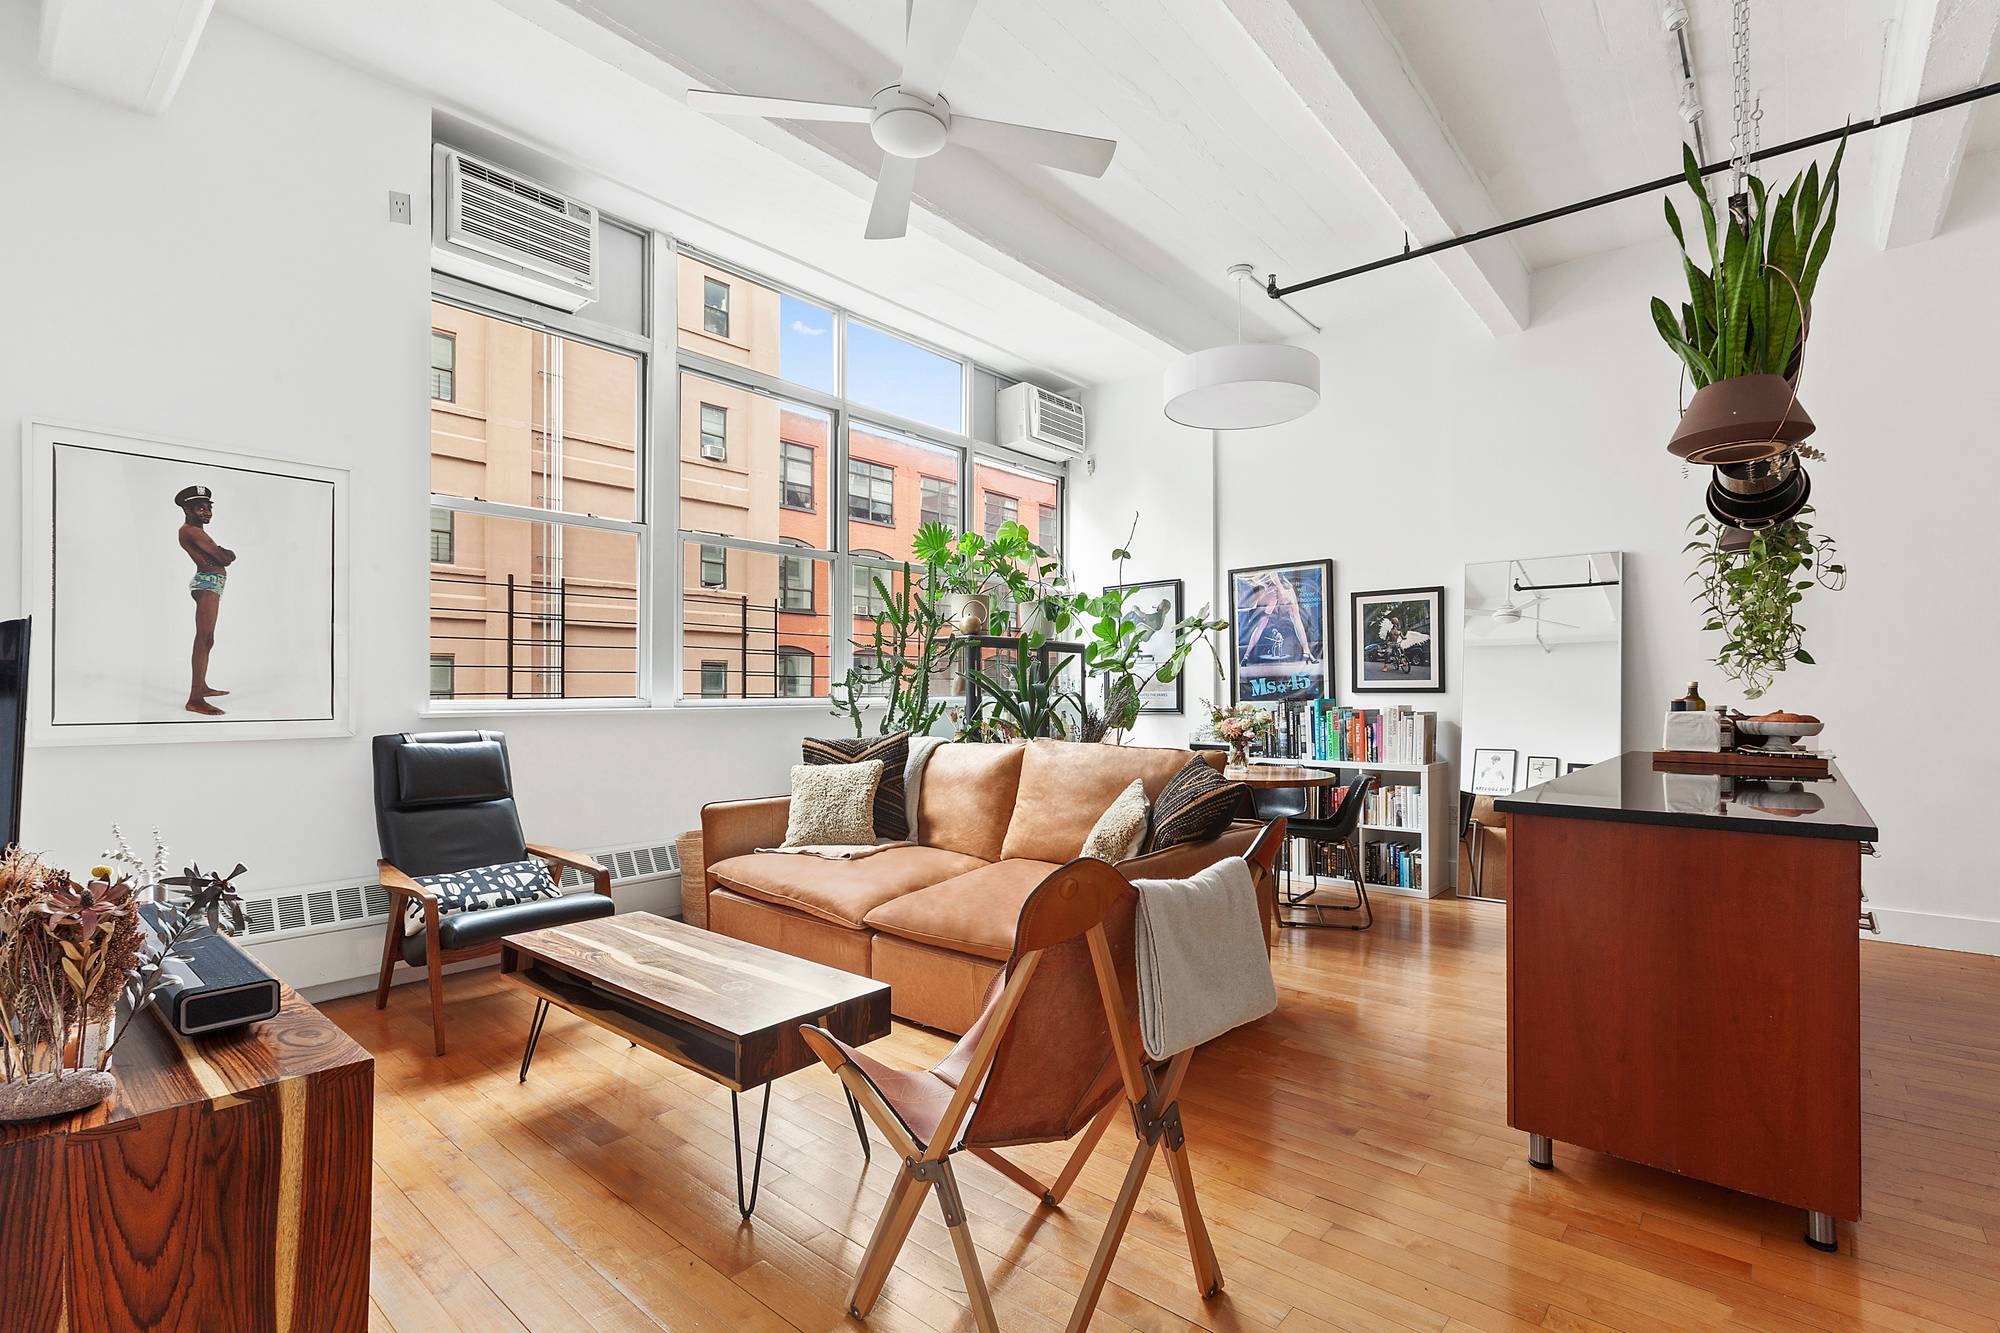 A voluminous two bedroom, two bathroom loft with palatial poured concrete beamed ceilings in a full service Clinton Hill condominium.